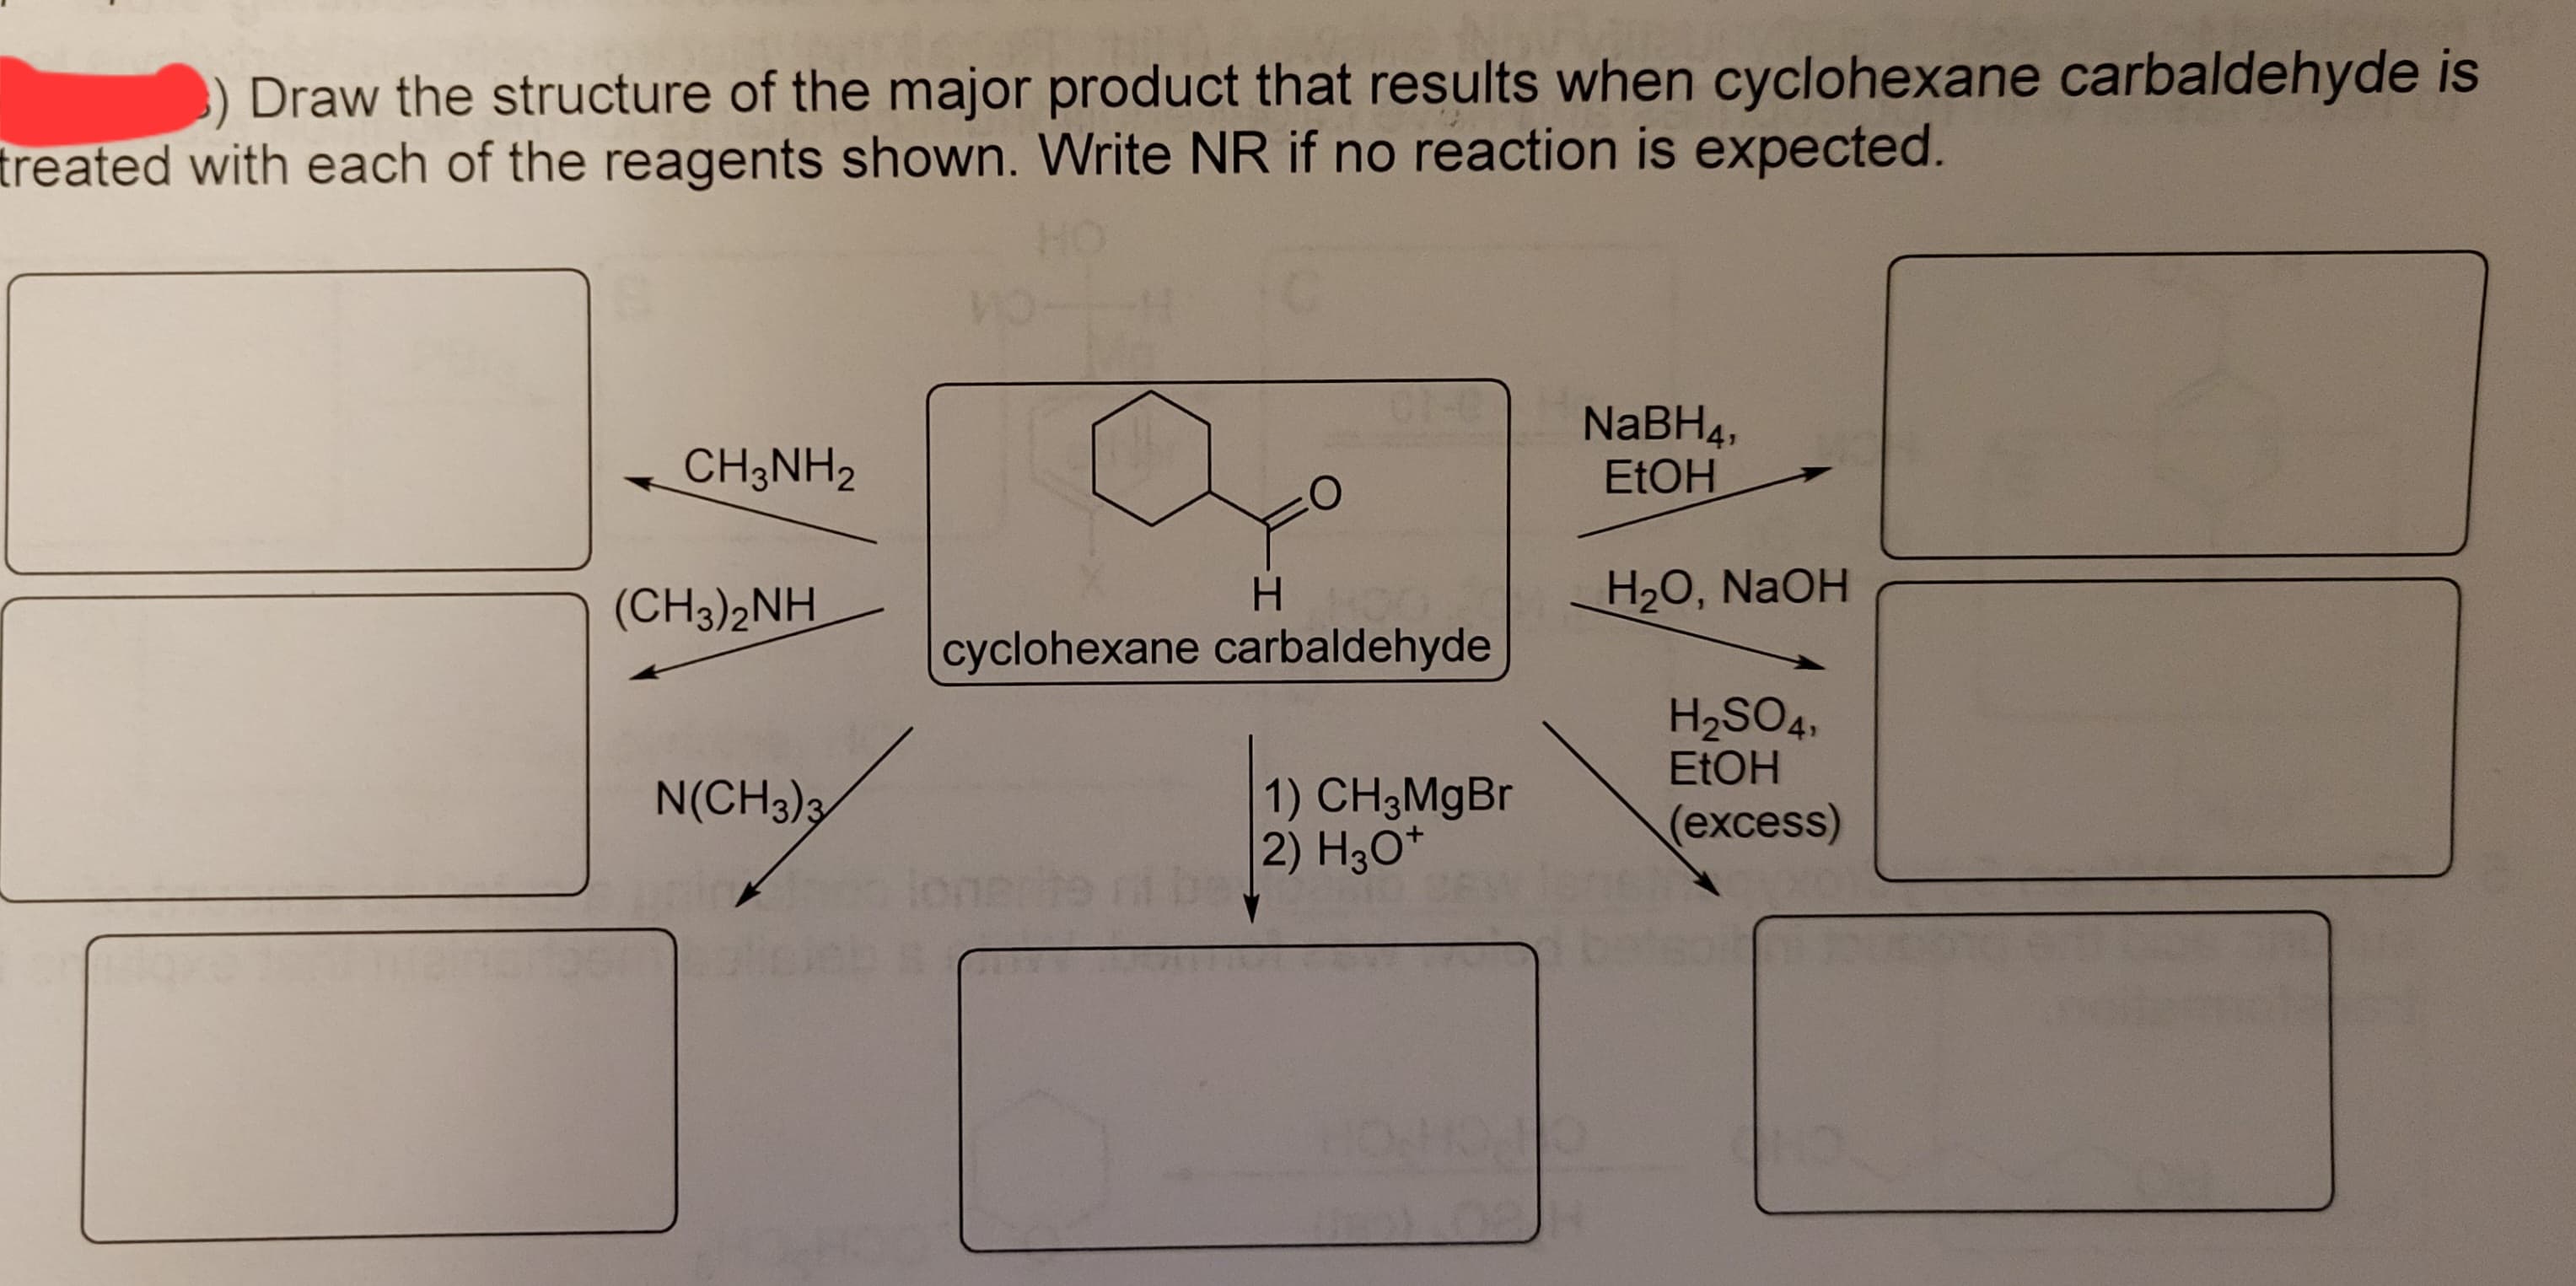 3) Draw the structure of the major product that results when cyclohexane carbaldehyde is
treated with each of the reagents shown. Write NR if no reaction is expected.
CH3NH2
(CH3)2NH
N(CH3)3
O
H
cyclohexane carbaldehyde
C
1) CH3MgBr
2) H3O+
NaBH4,
EtOH
H2₂O, NaOH
H₂SO4,
EtOH
(excess)